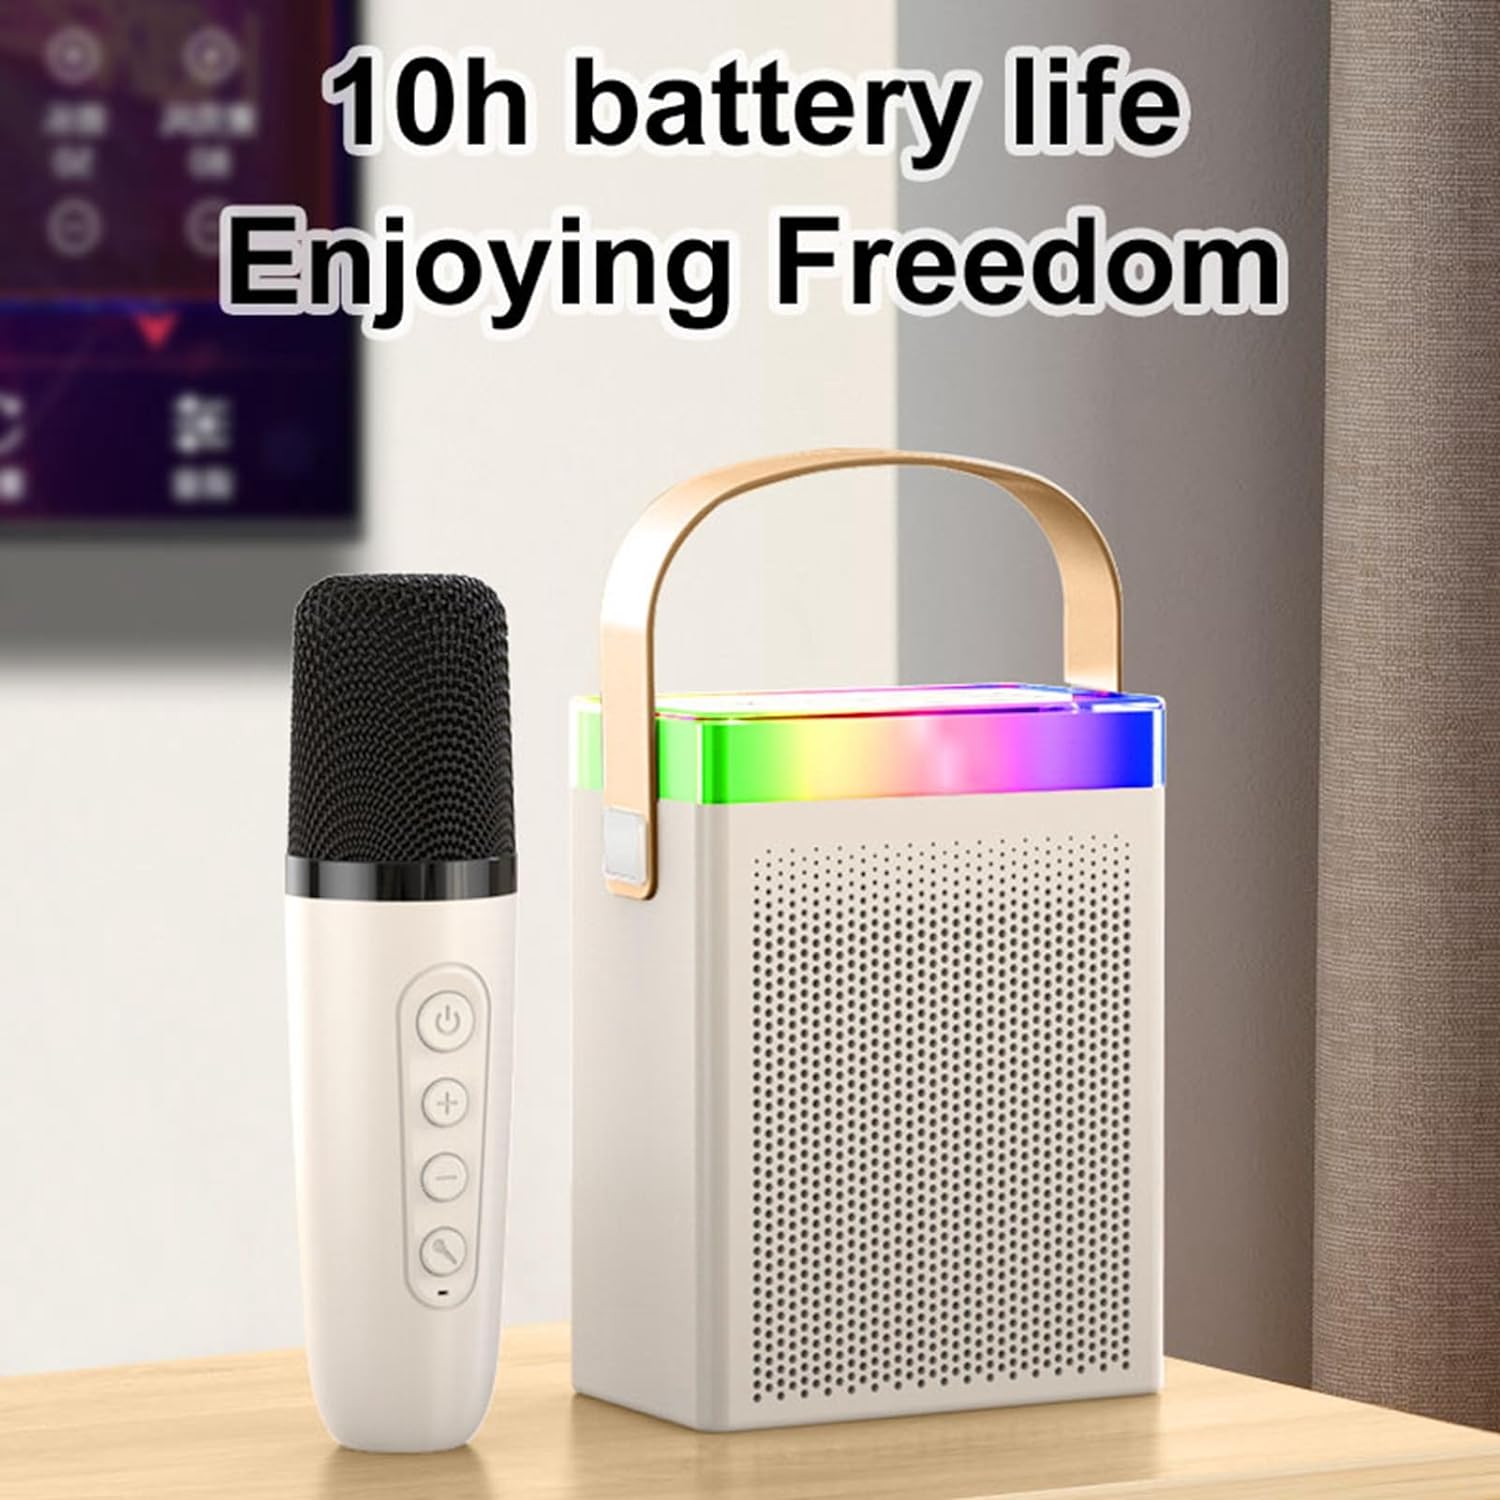 PUSOKEI Karaoke Machine with Two Wireless Microphones, Portable Bluetooth Speaker Set with RGB Lighting for Adults and Kids, Gifts for Boys and Girls (White)